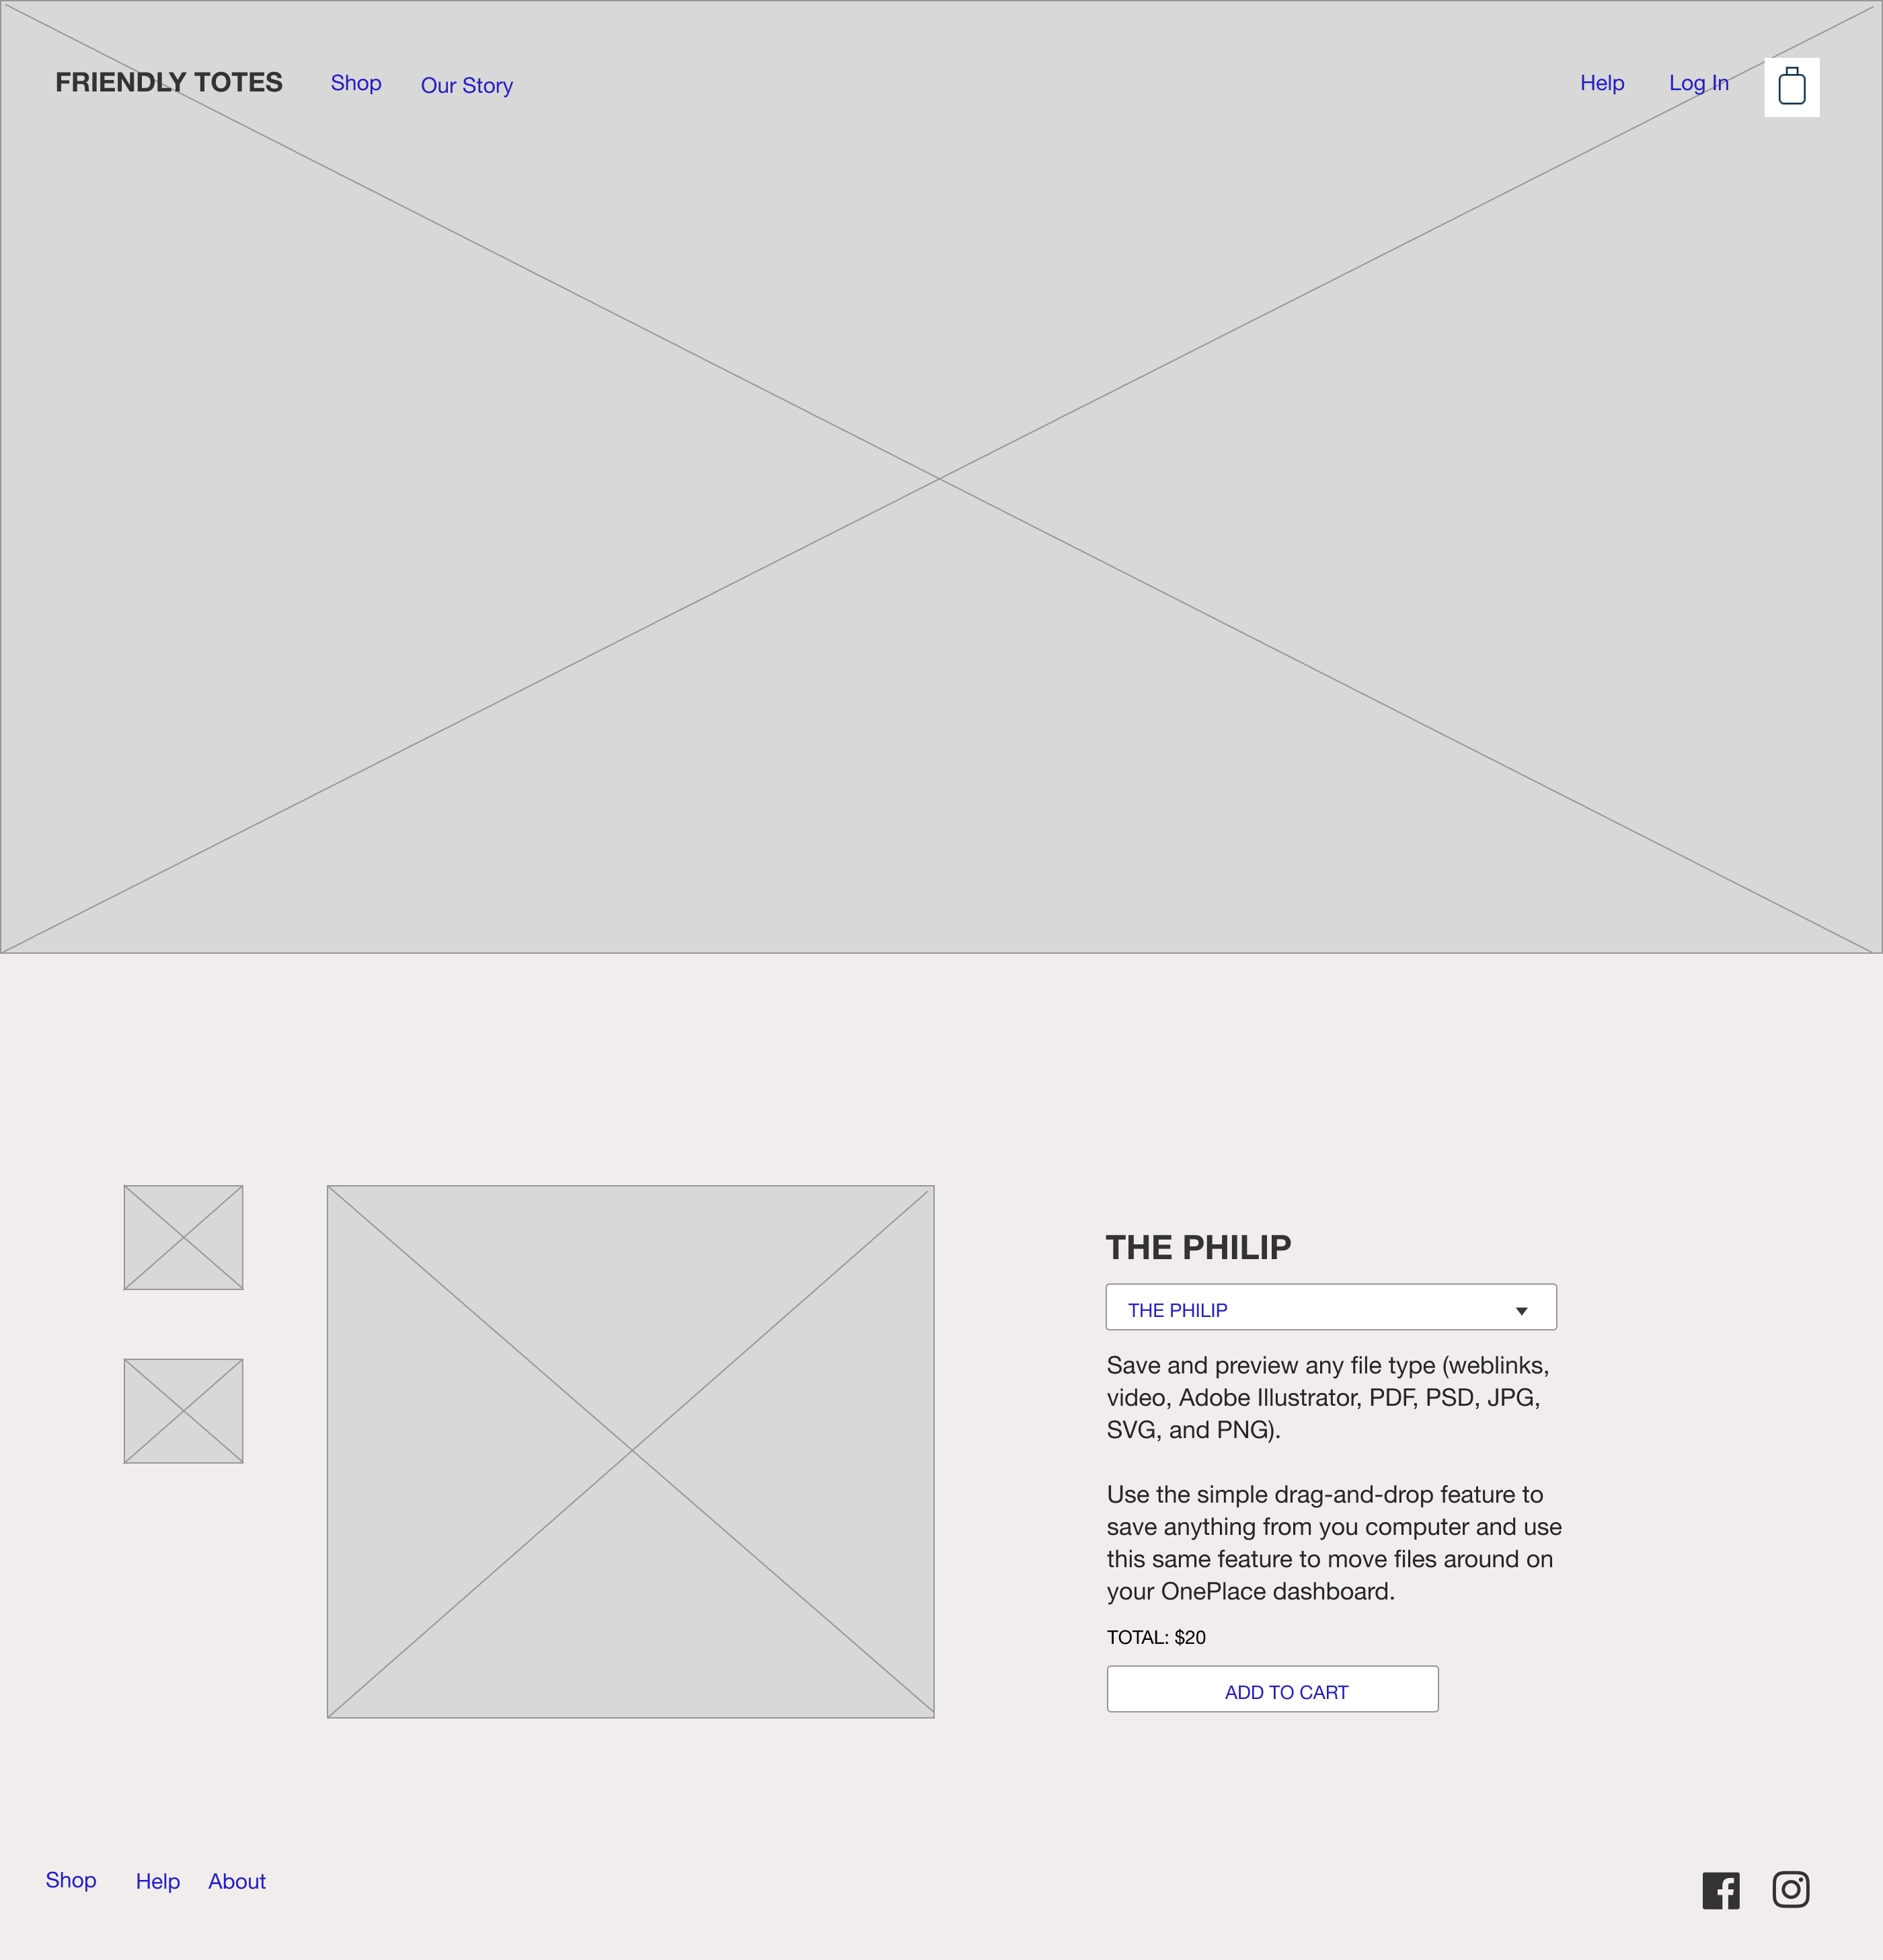 low-fidelity wireframe images